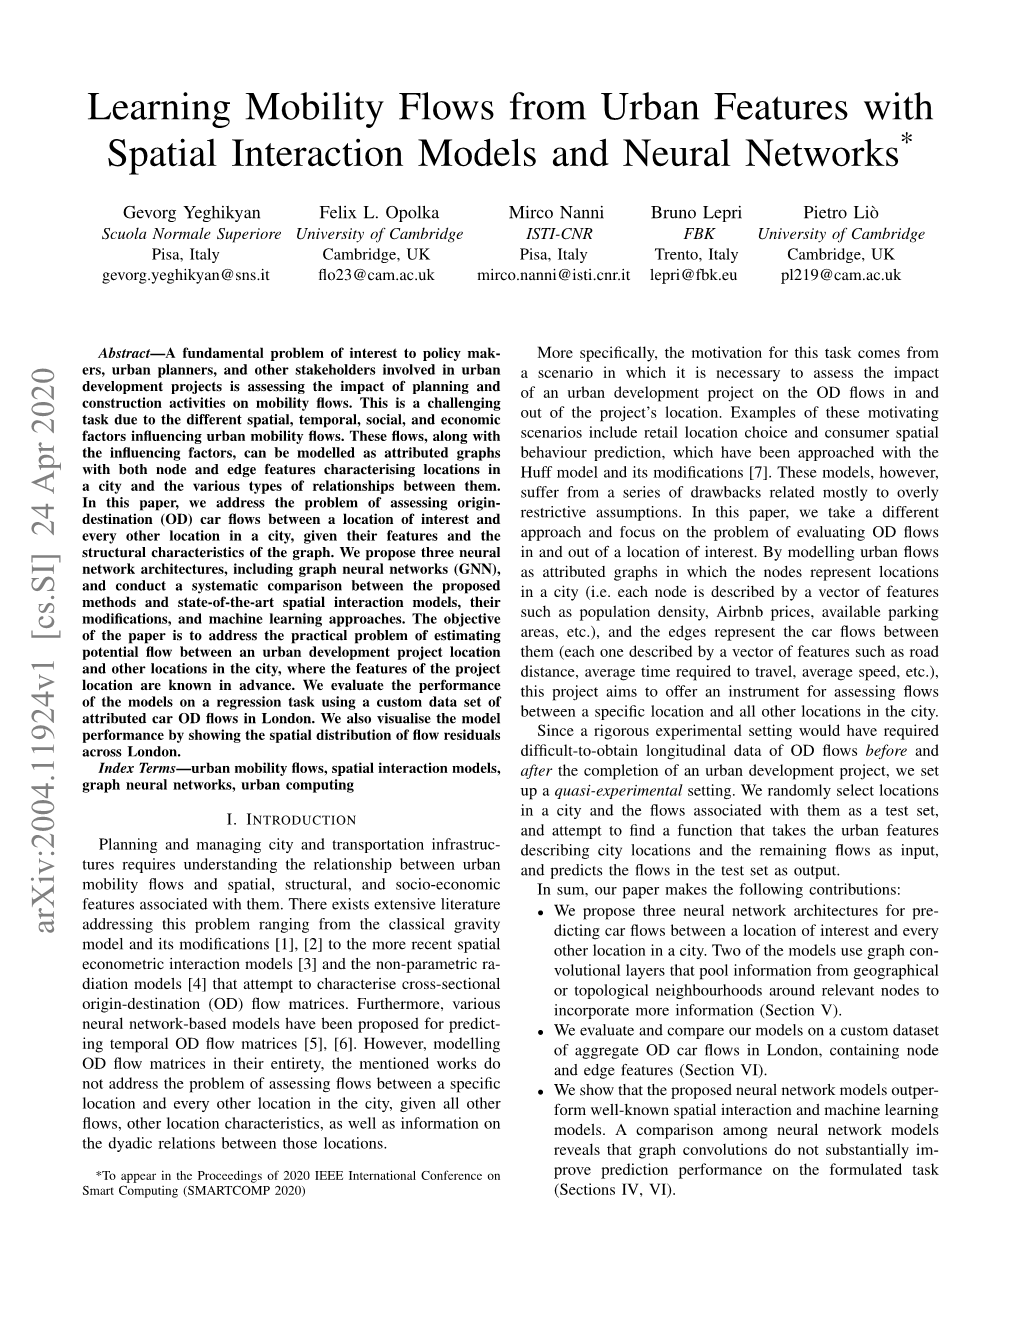 Learning Mobility Flows from Urban Features with Spatial Interaction Models and Neural Networks*